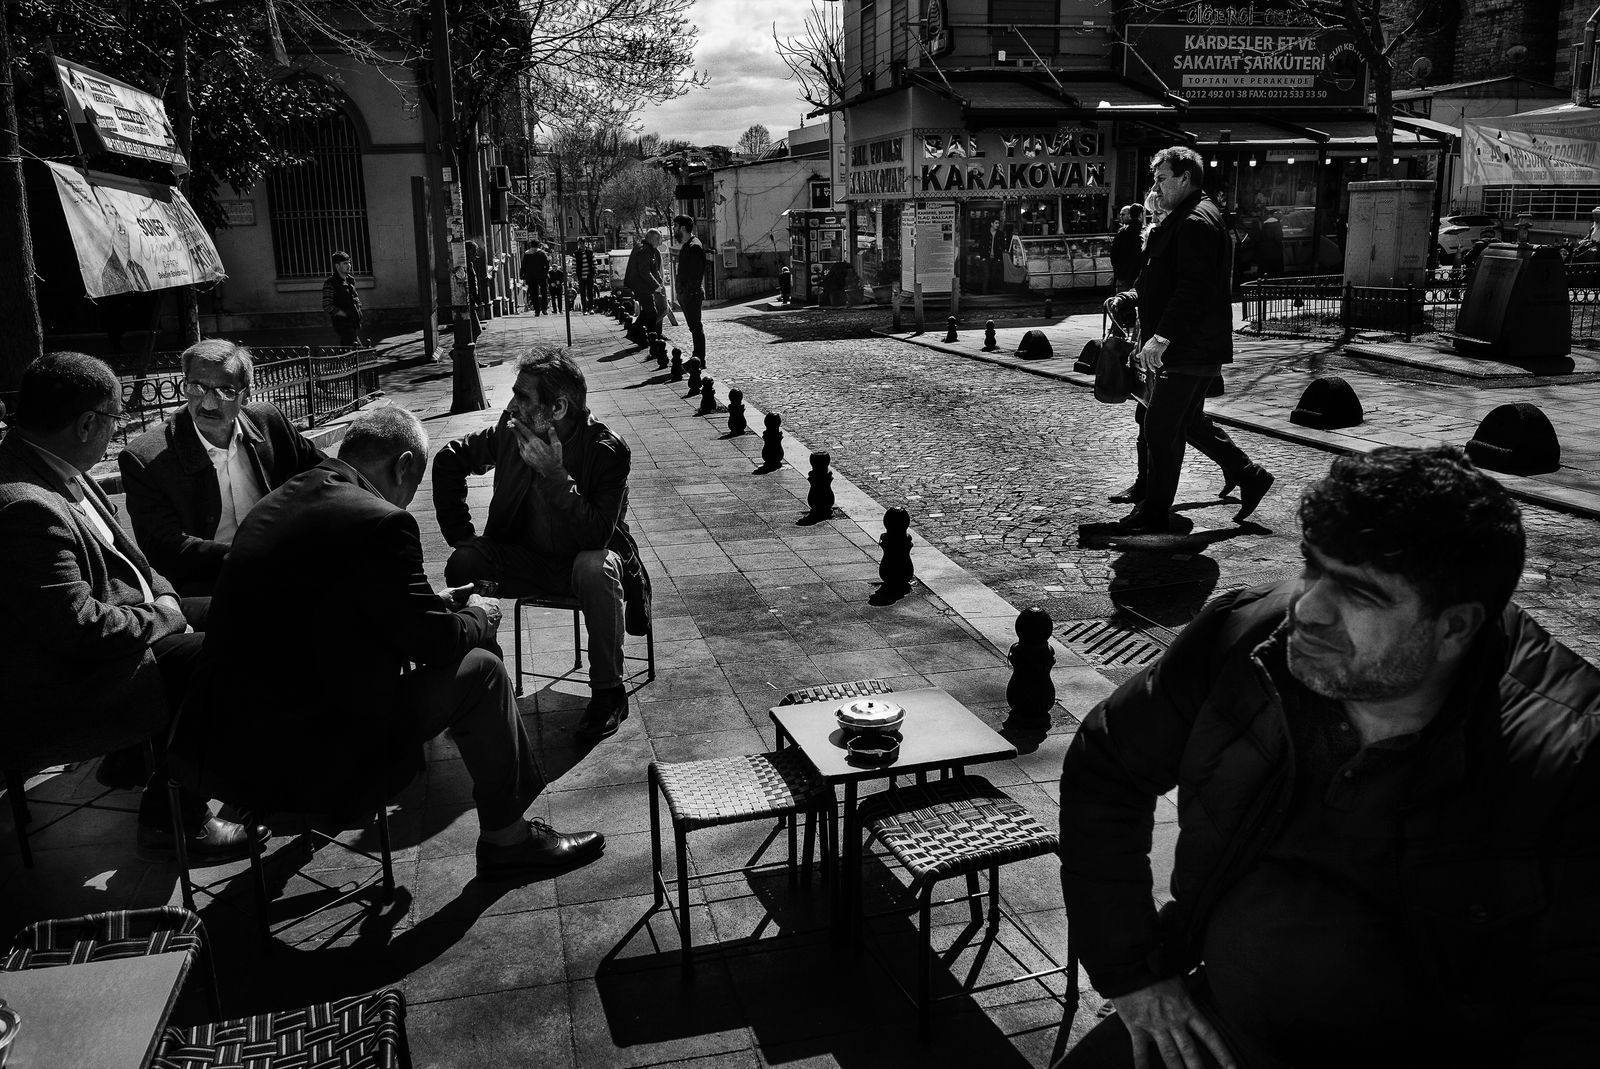 © Maurizio Gjivovich - Image from the ISTANBUL photography project